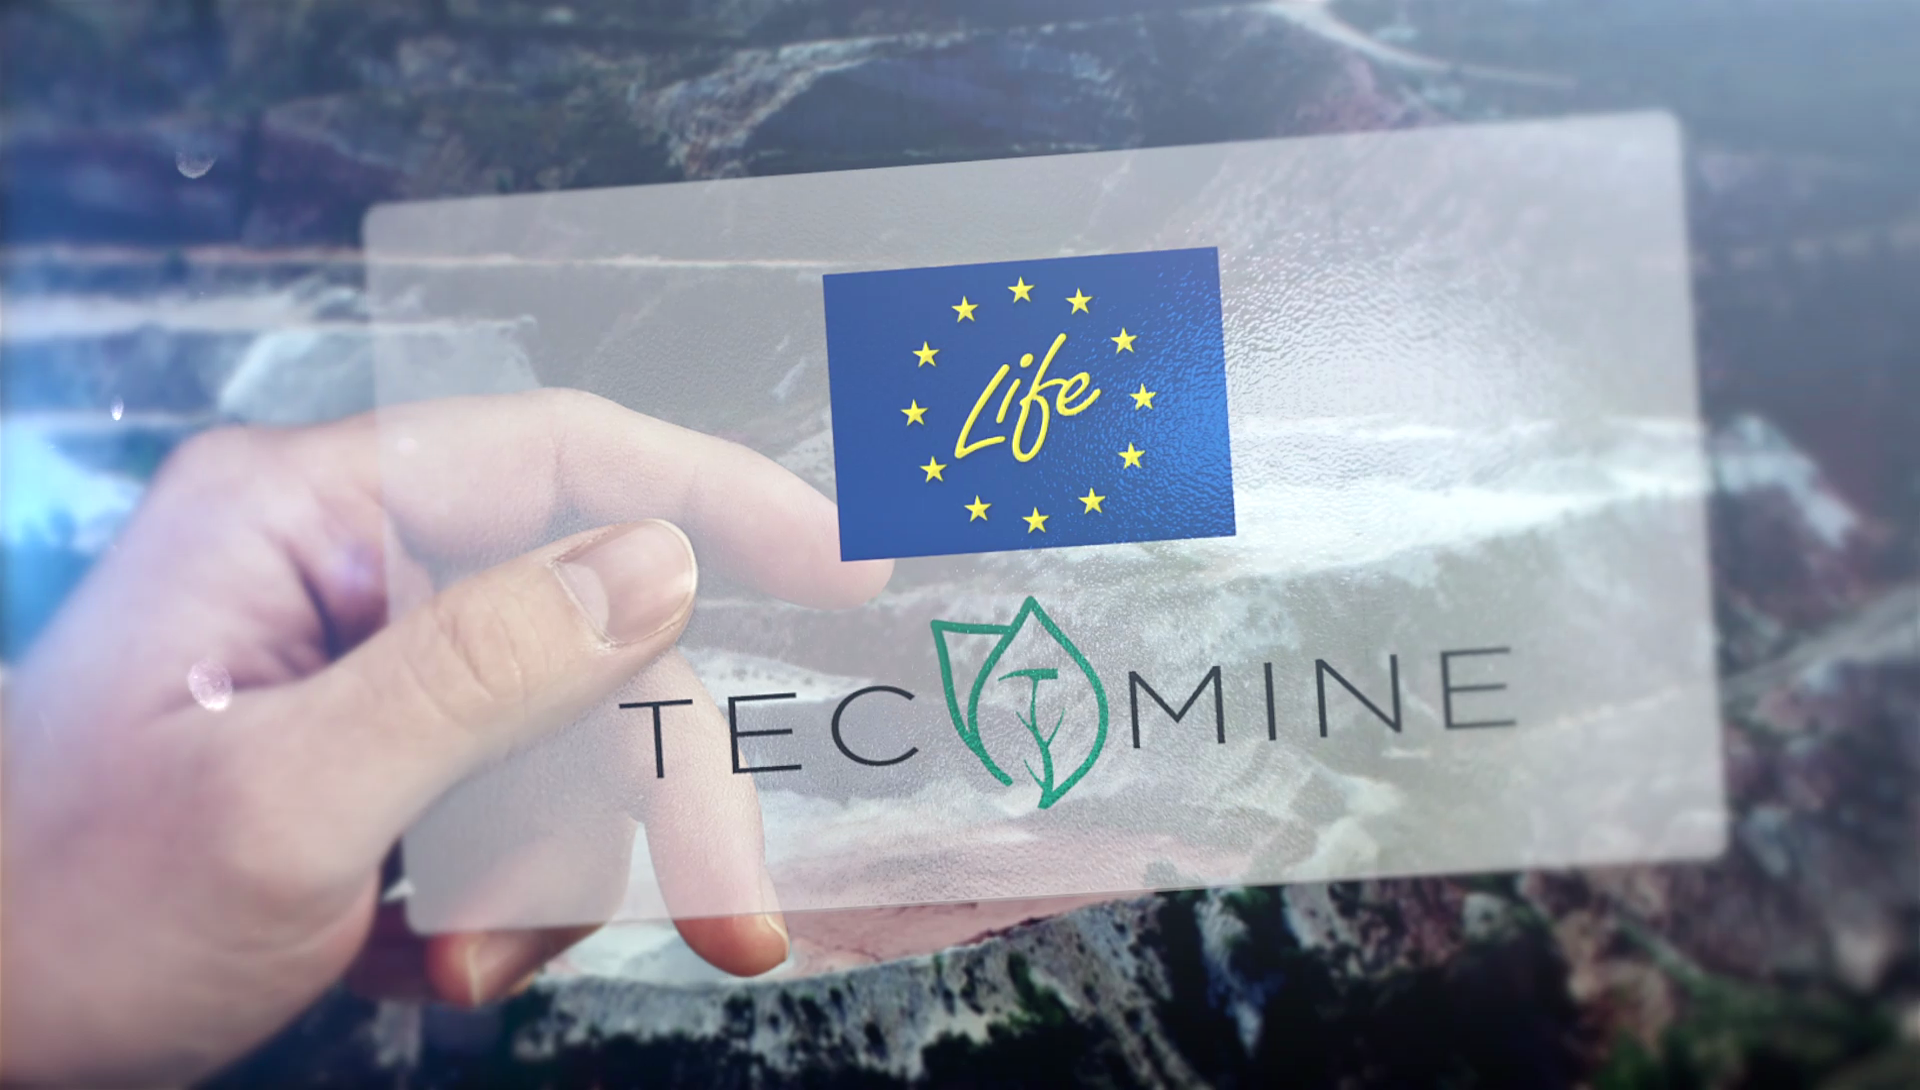 LIFE TECMINE official video launching